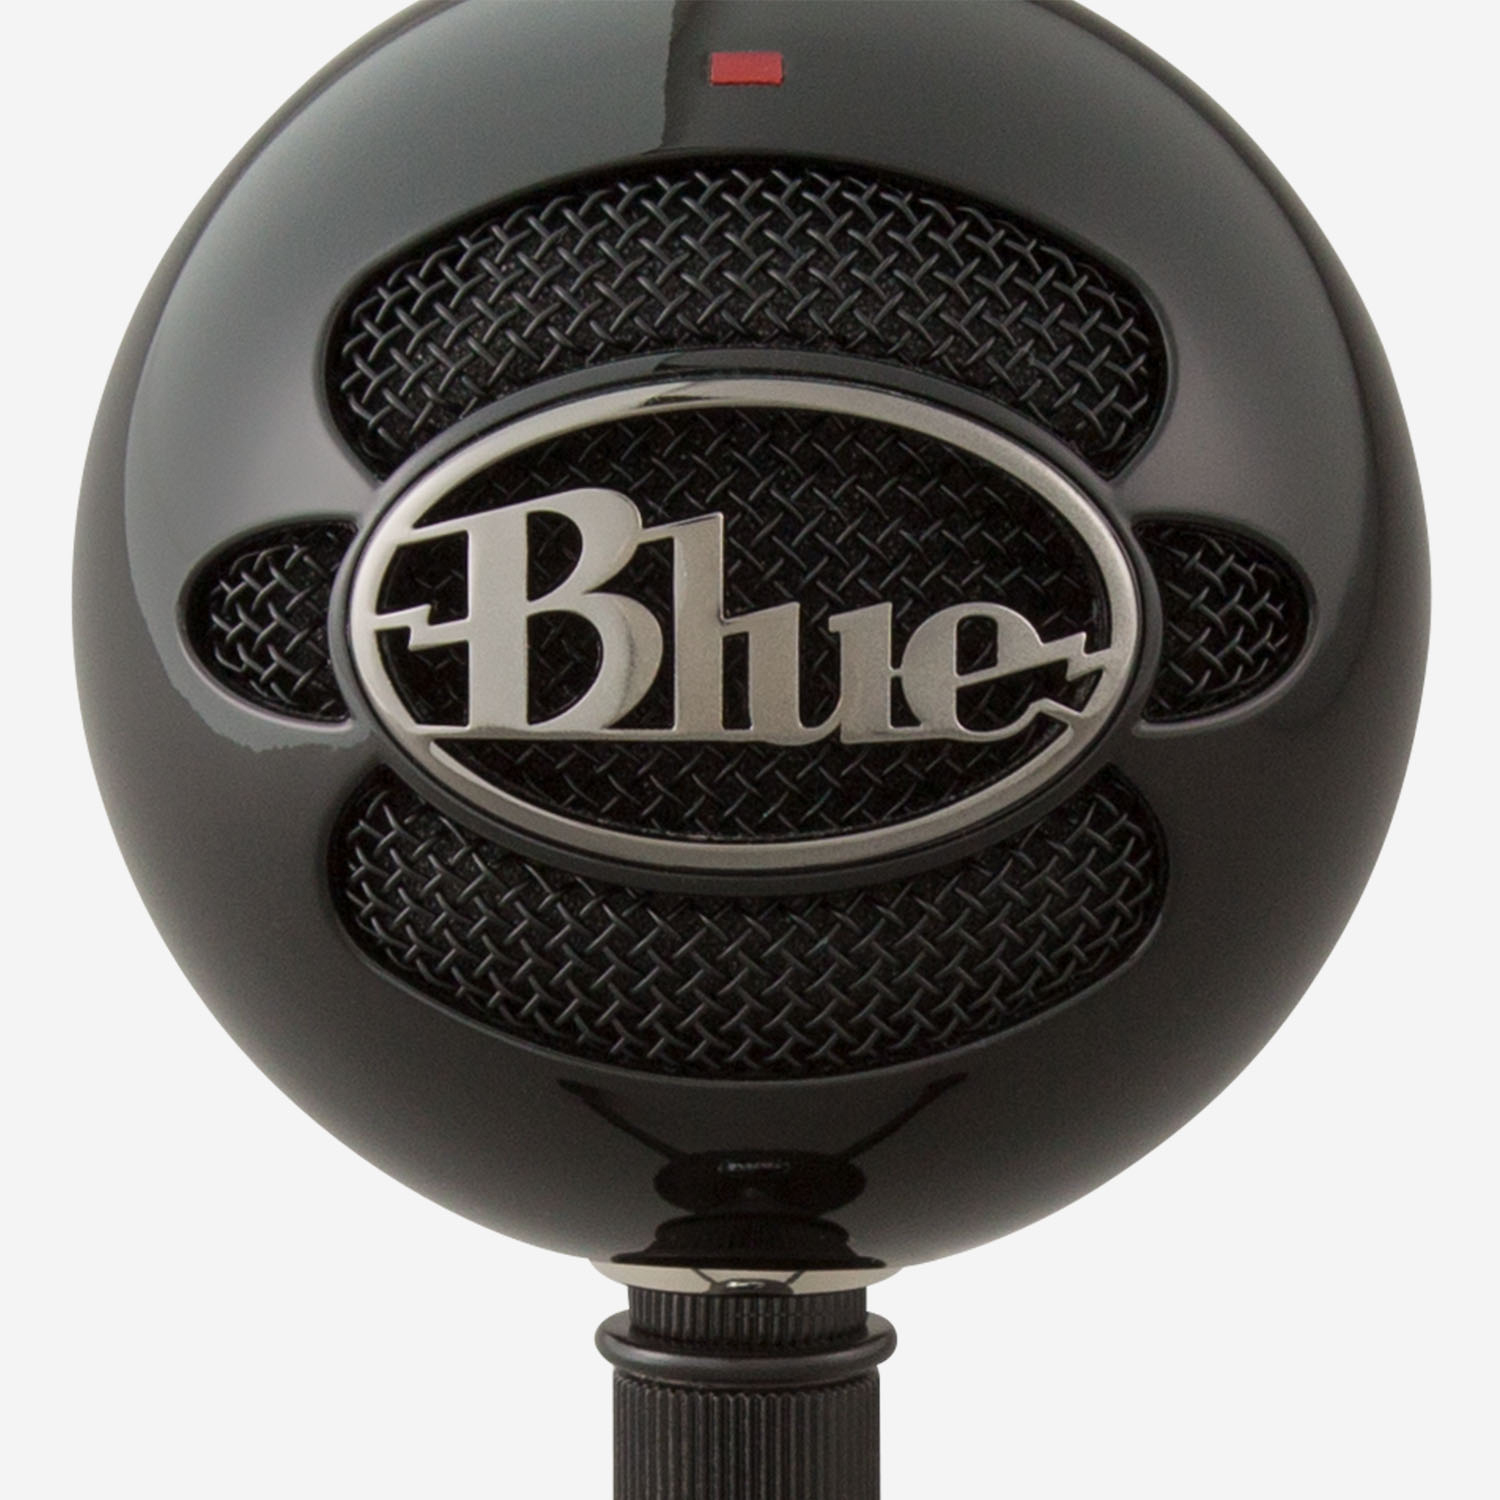 Blue Microphones Snowball Wired Cardioid and USB Vocal Microphone 988-000069 Best Buy